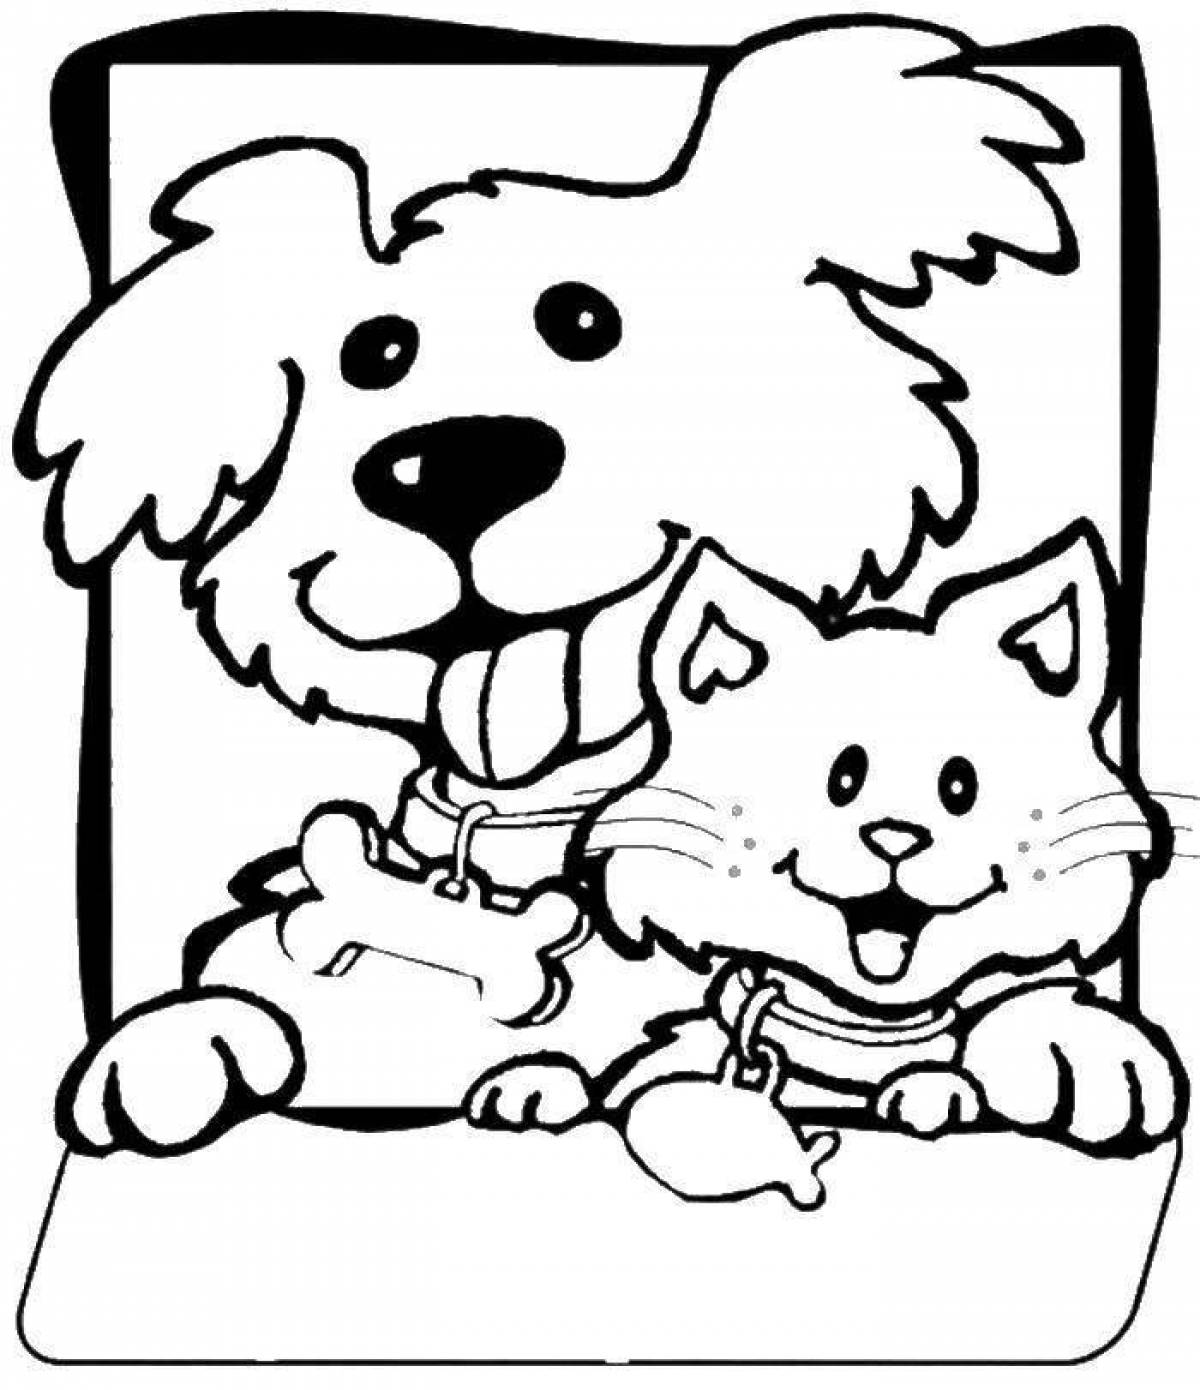 Fun coloring pages animals cats and dogs